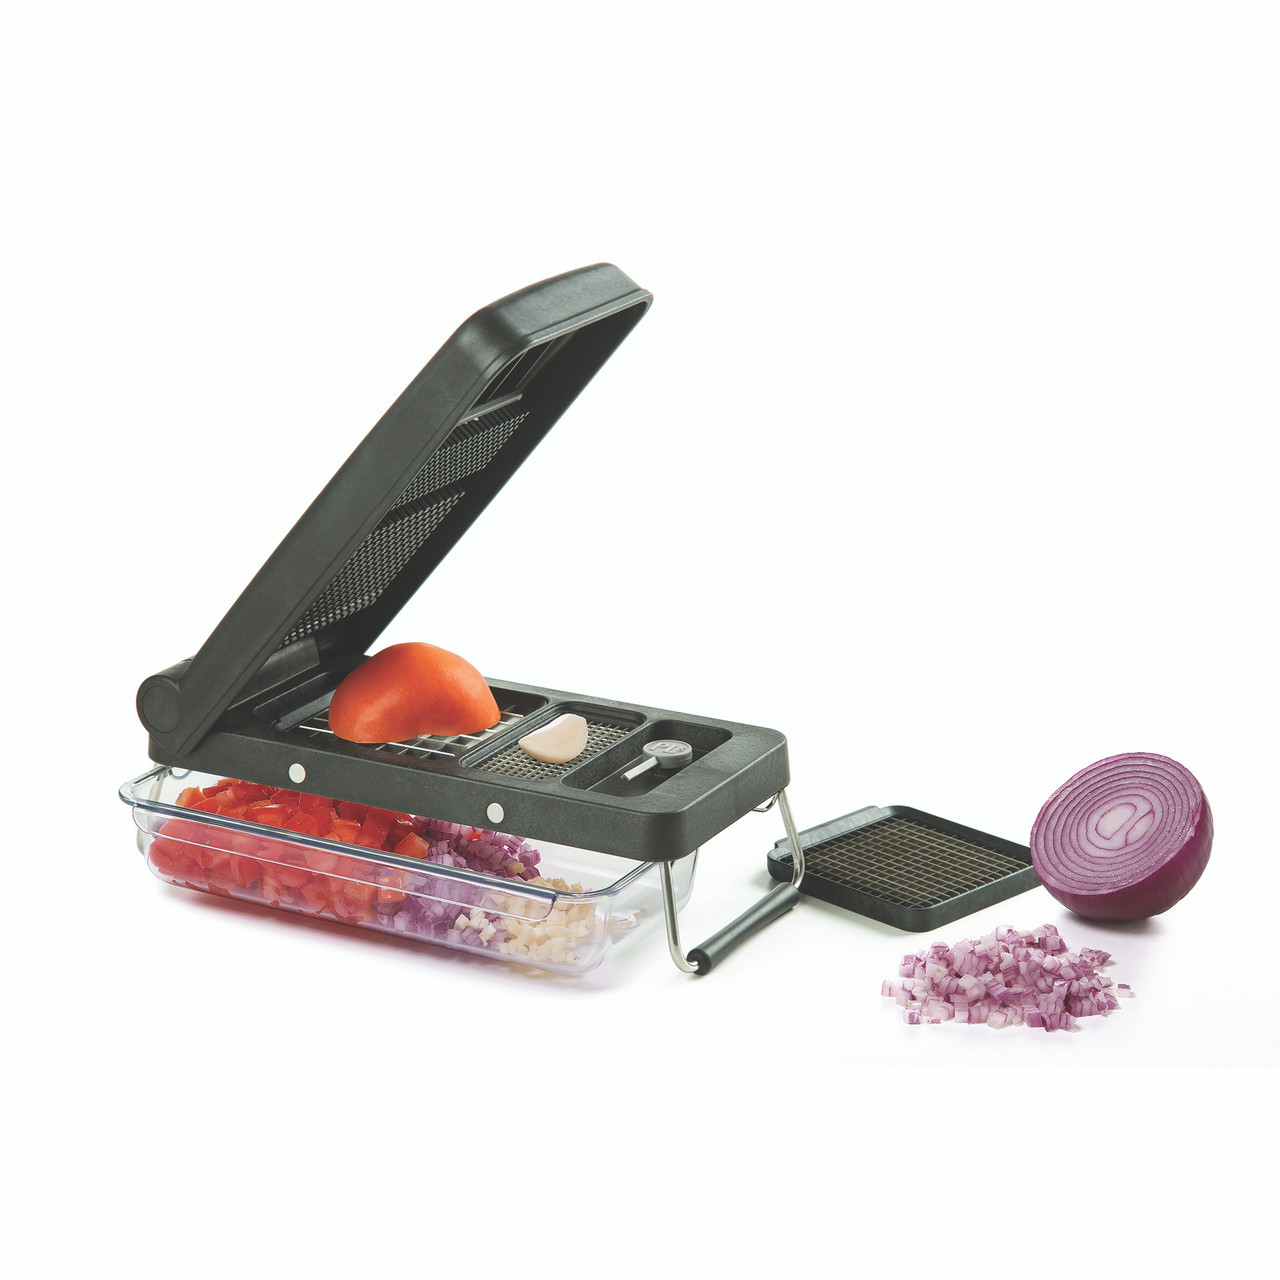 Seeding and chopping machine - Electric tomato press and chopper combi